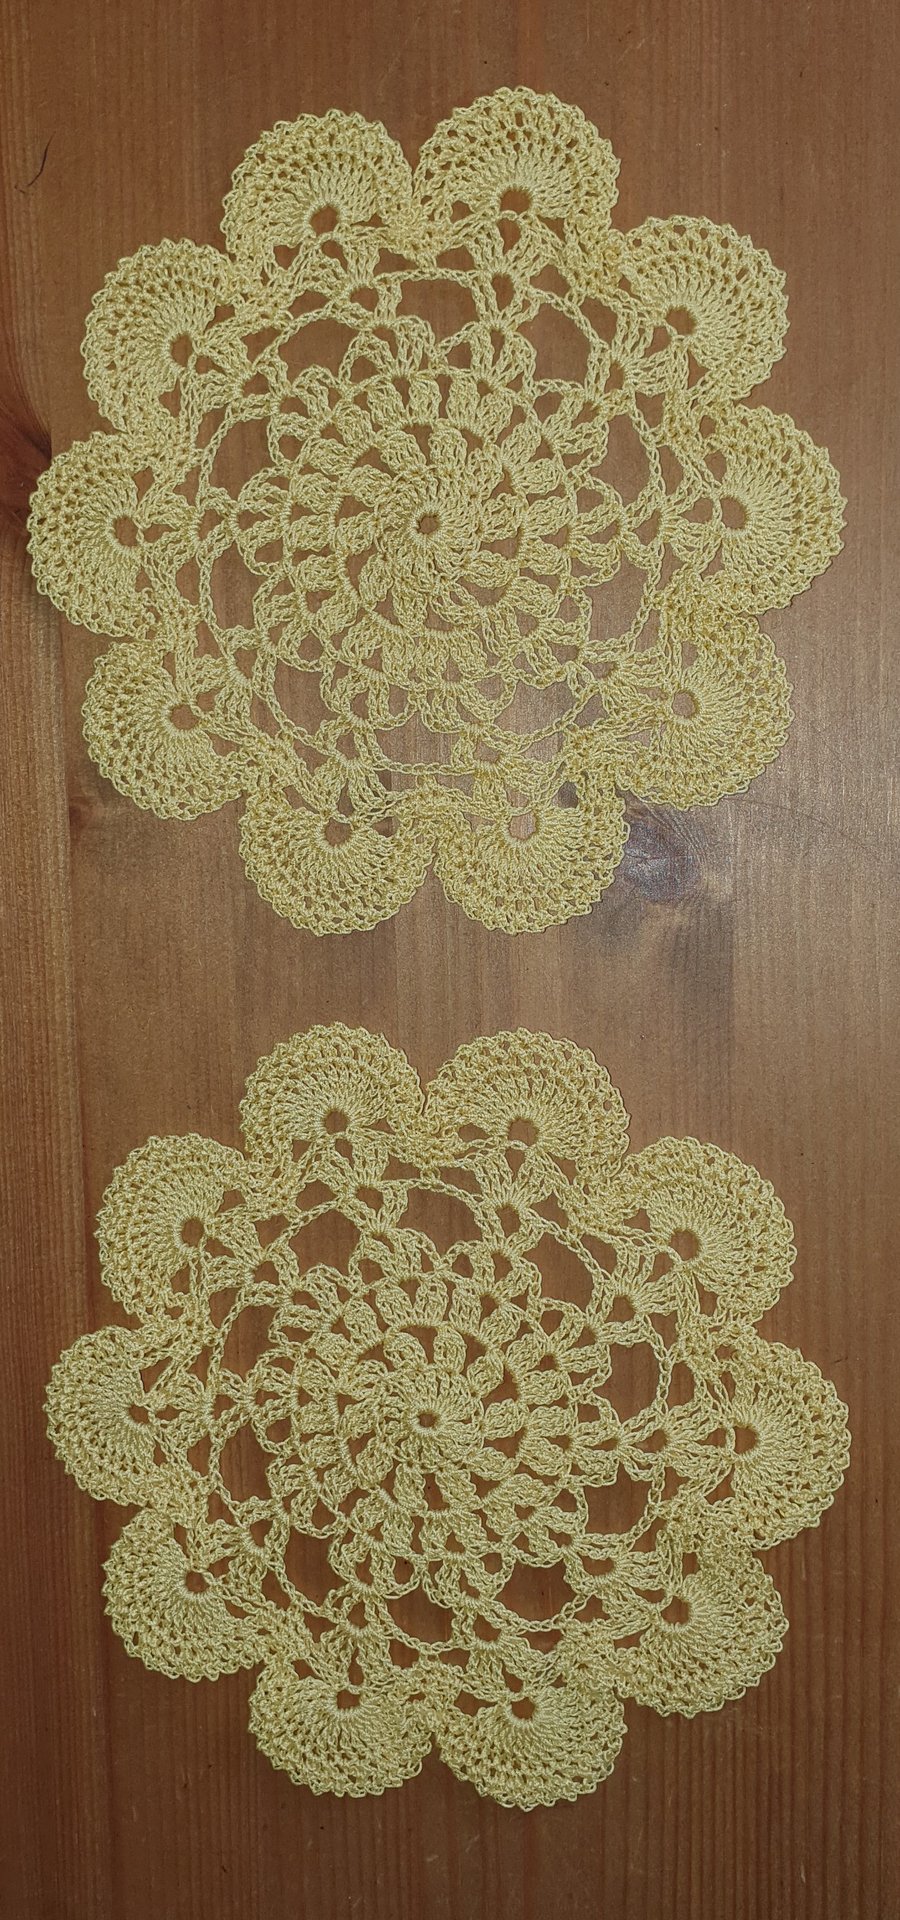 YELLOW DOILIES - SET of 2 - LOVELY SCALLOPED EDGING - 100% COTTON 15cm